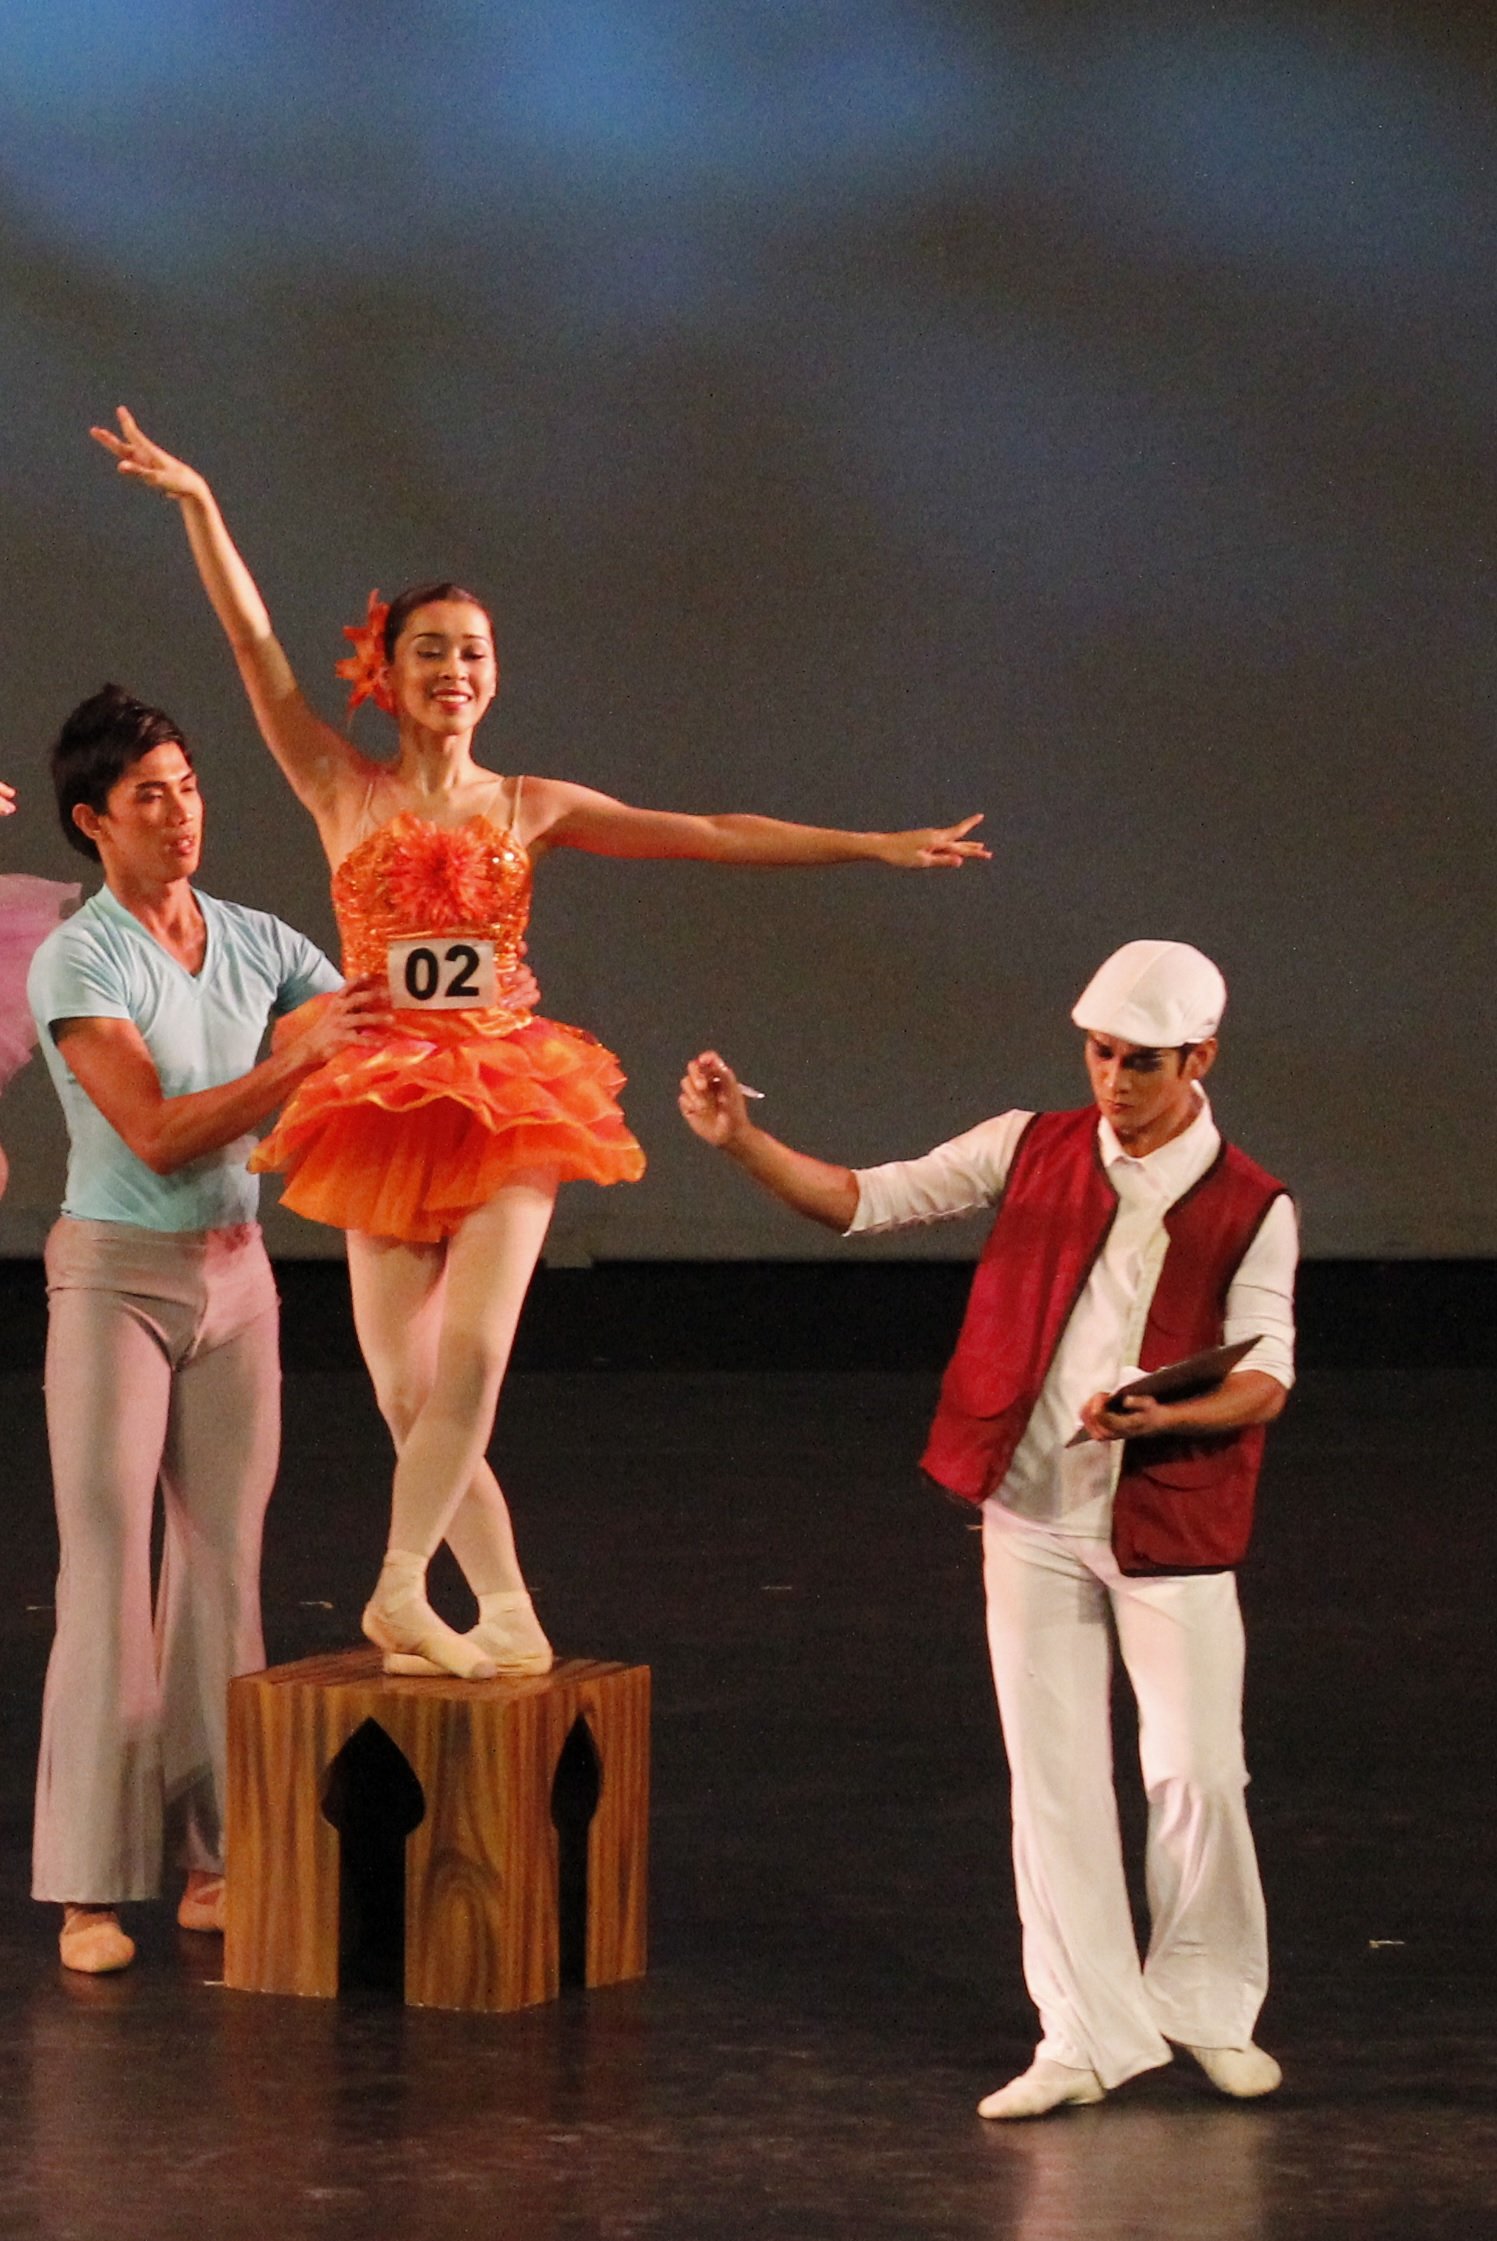    Rudy De Dios as the casting agent in  Sinderela  (2012) assesses one of the hopefuls played by Marika Capati – in an attractive salmon tutu – if she will make the cut, as she is assisted by Harold Salgado.  Sinderela  choreographer Hazel Sabas-Gow